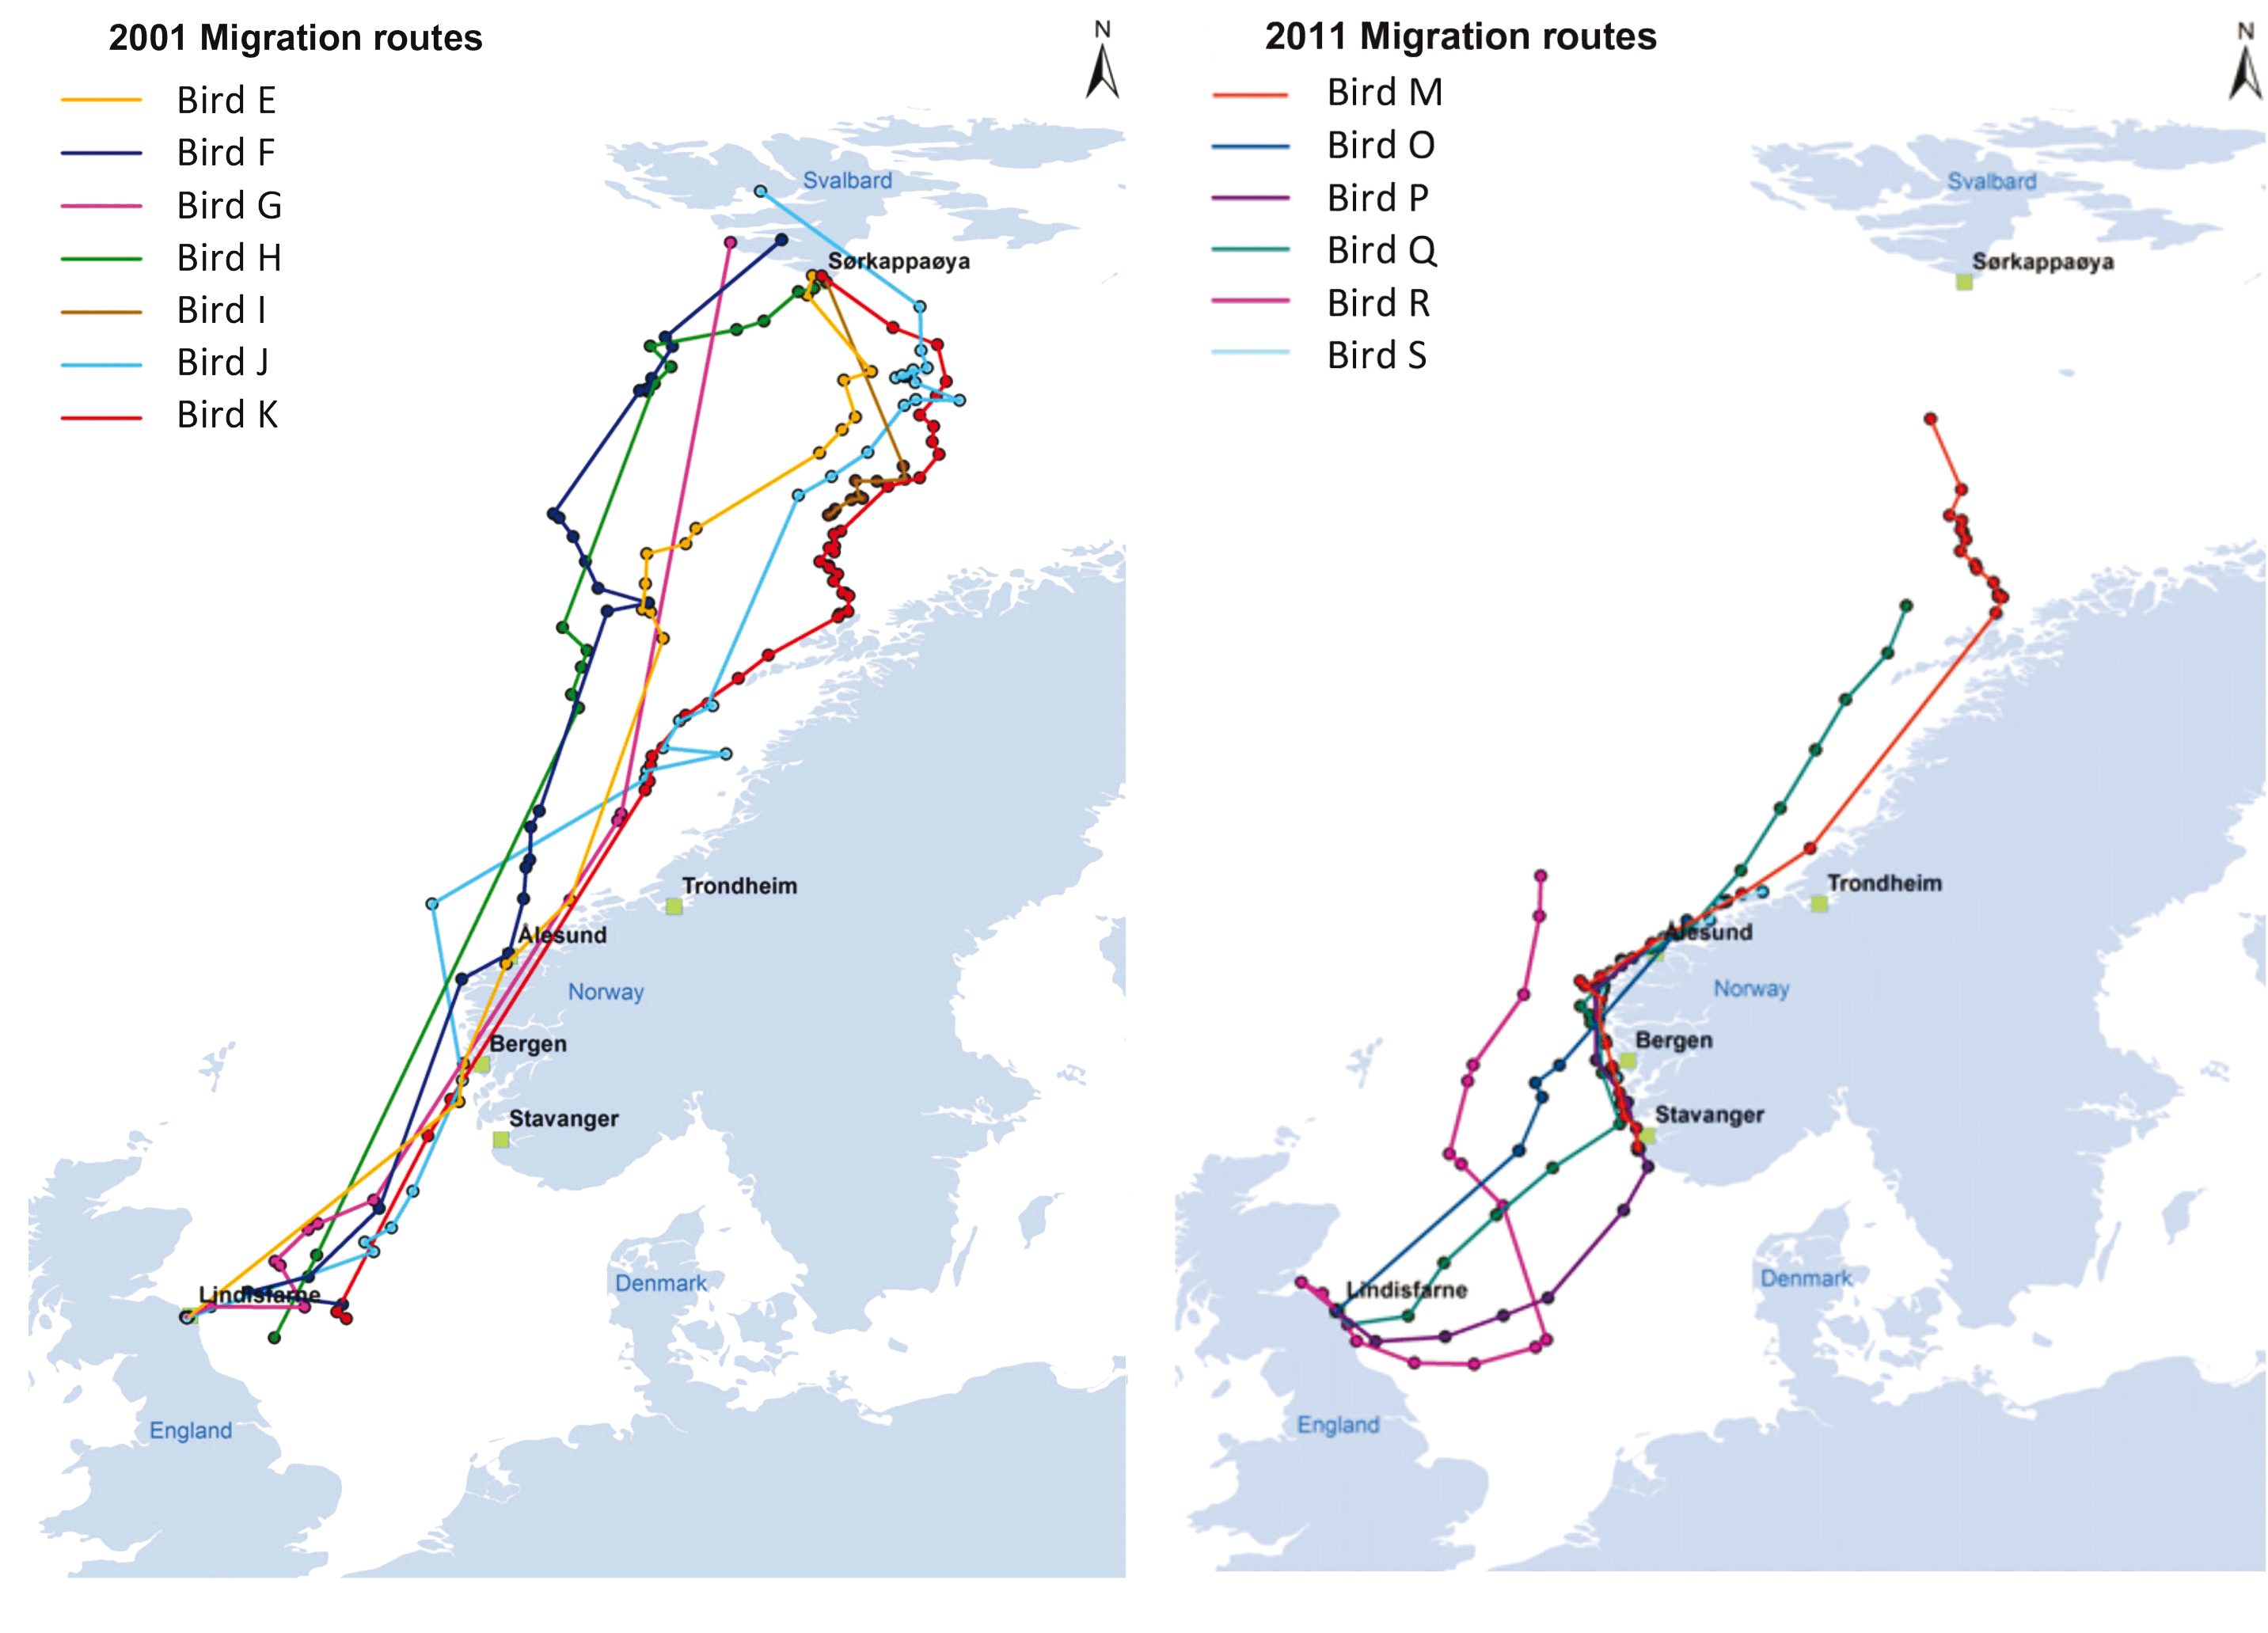 Autumn migration route of the tracked Light-bellied Brent Geese in 2001 and 2011. In 2011, the batteries were depleted at start and charged during migration, thus the missing first leg of the trip. (from [Vissing et al., 2020], credit Aarhus University)